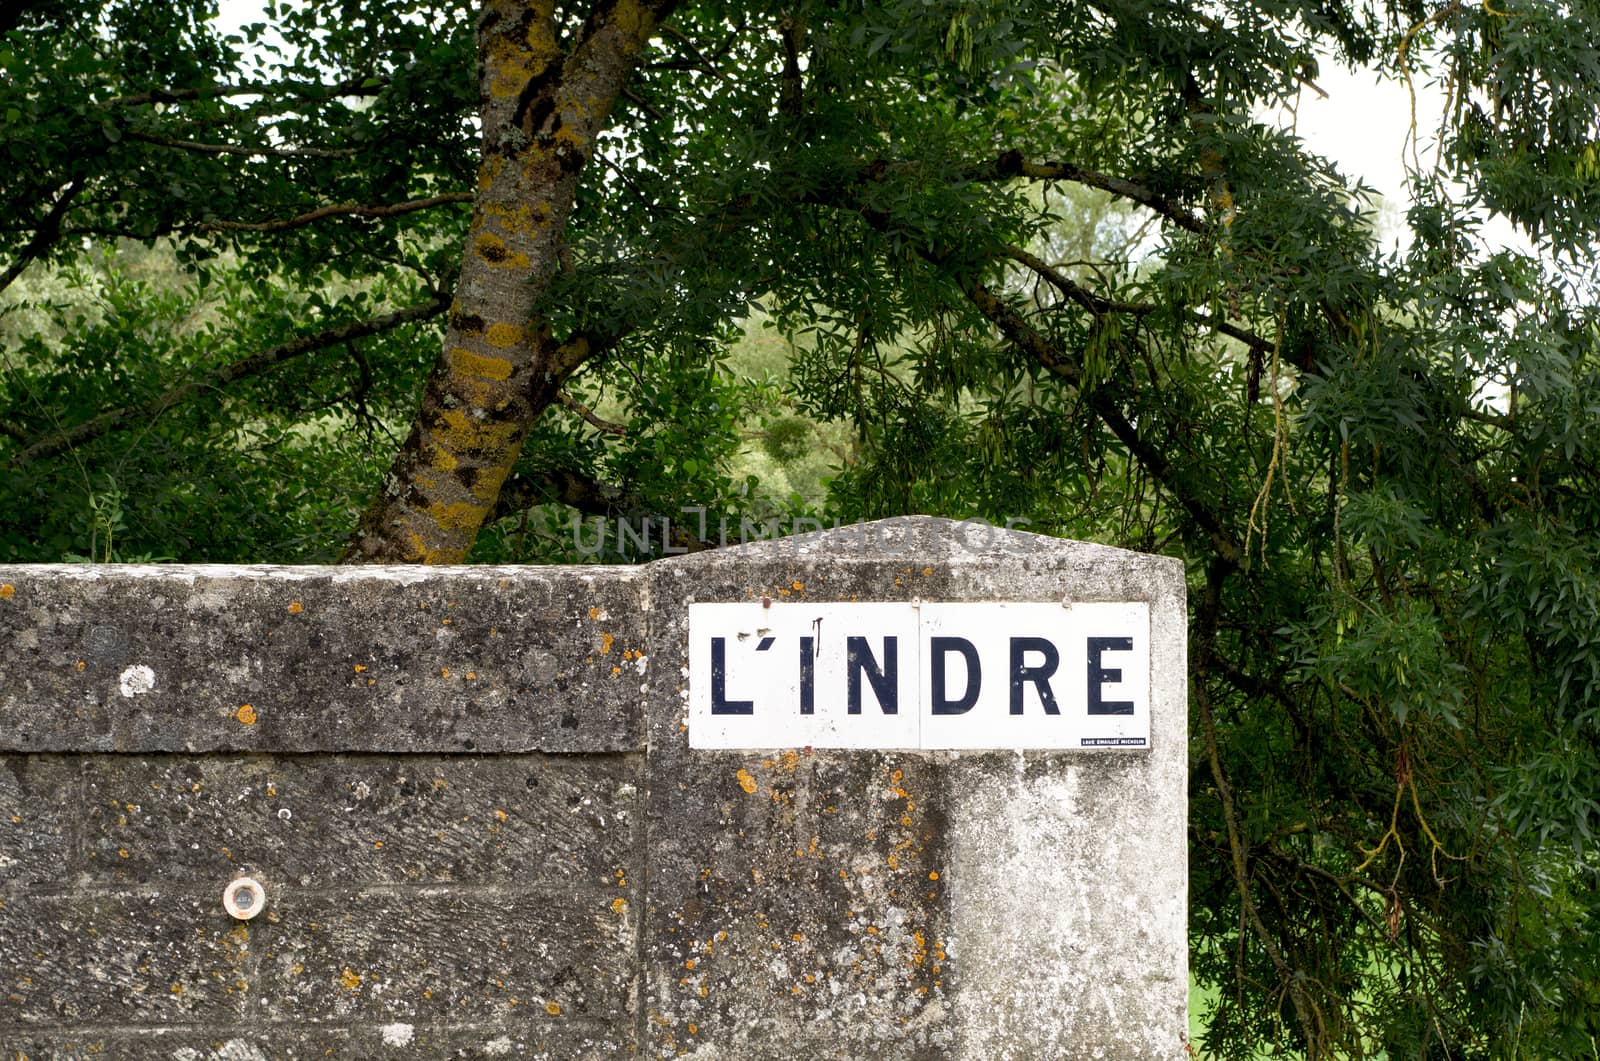 River name on a sign painted on a stone bridge over indicated River Indre, France